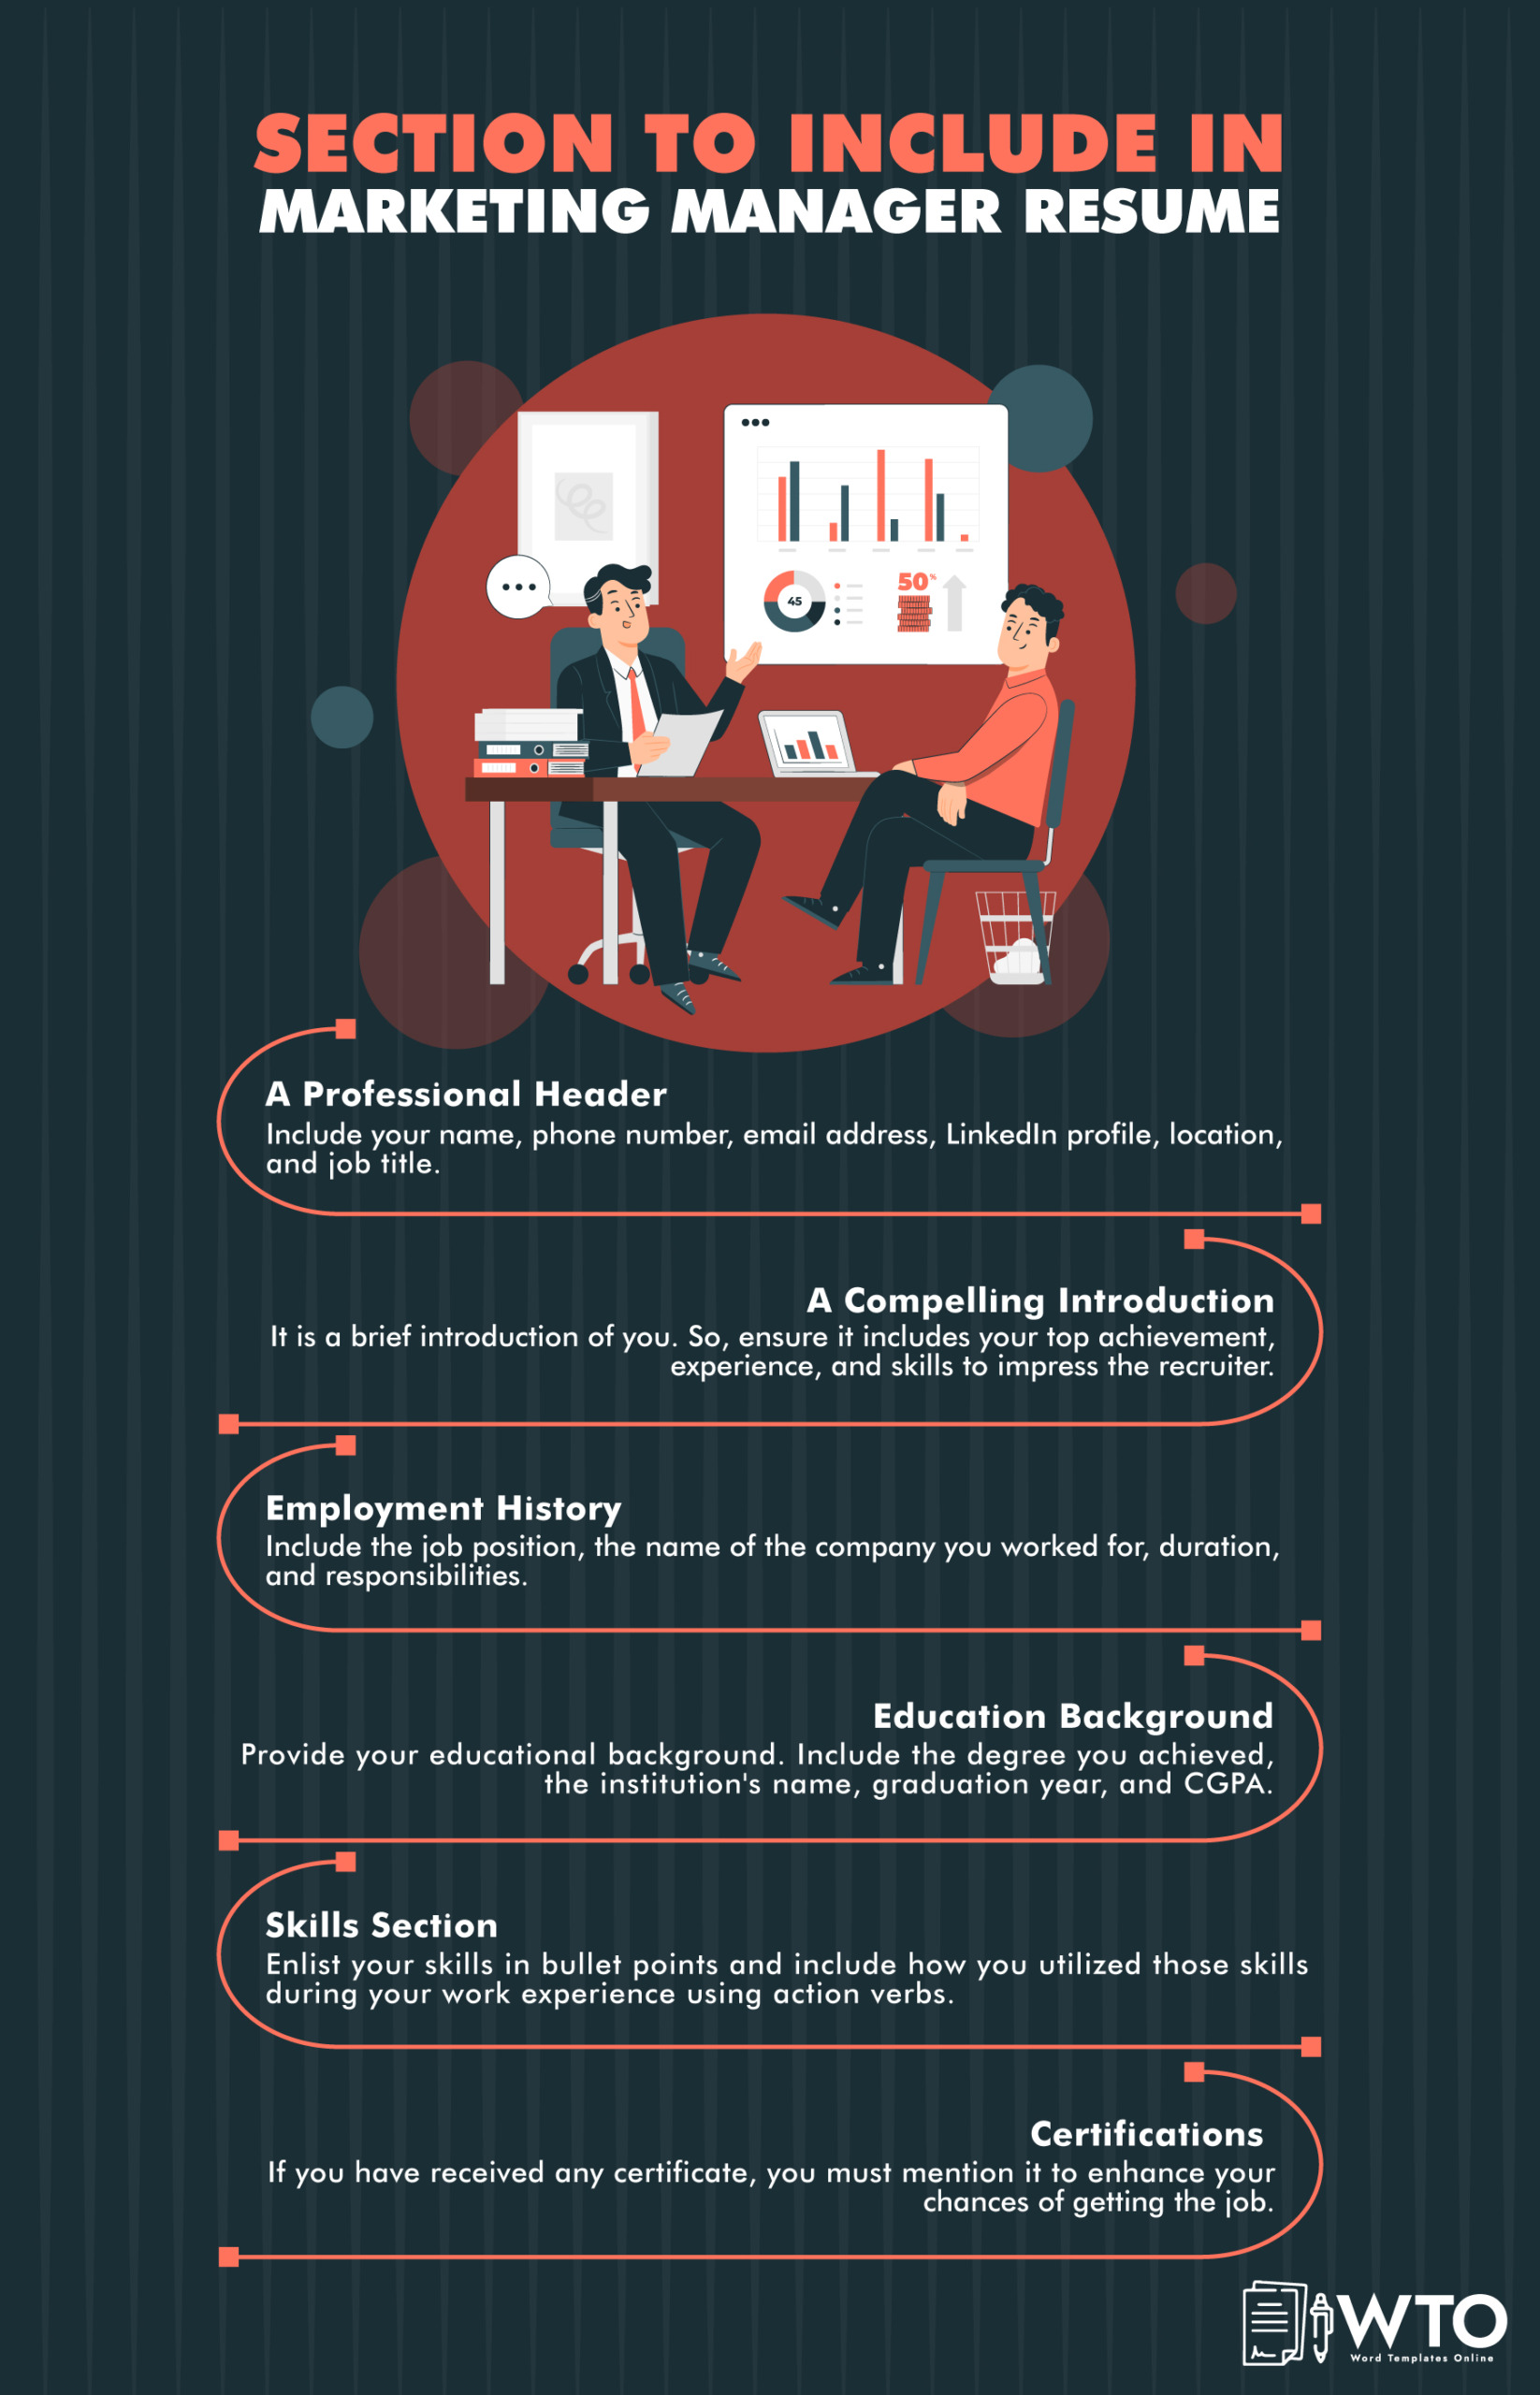 This infographic tells about the sections to include in a Marketing Manager Resume.